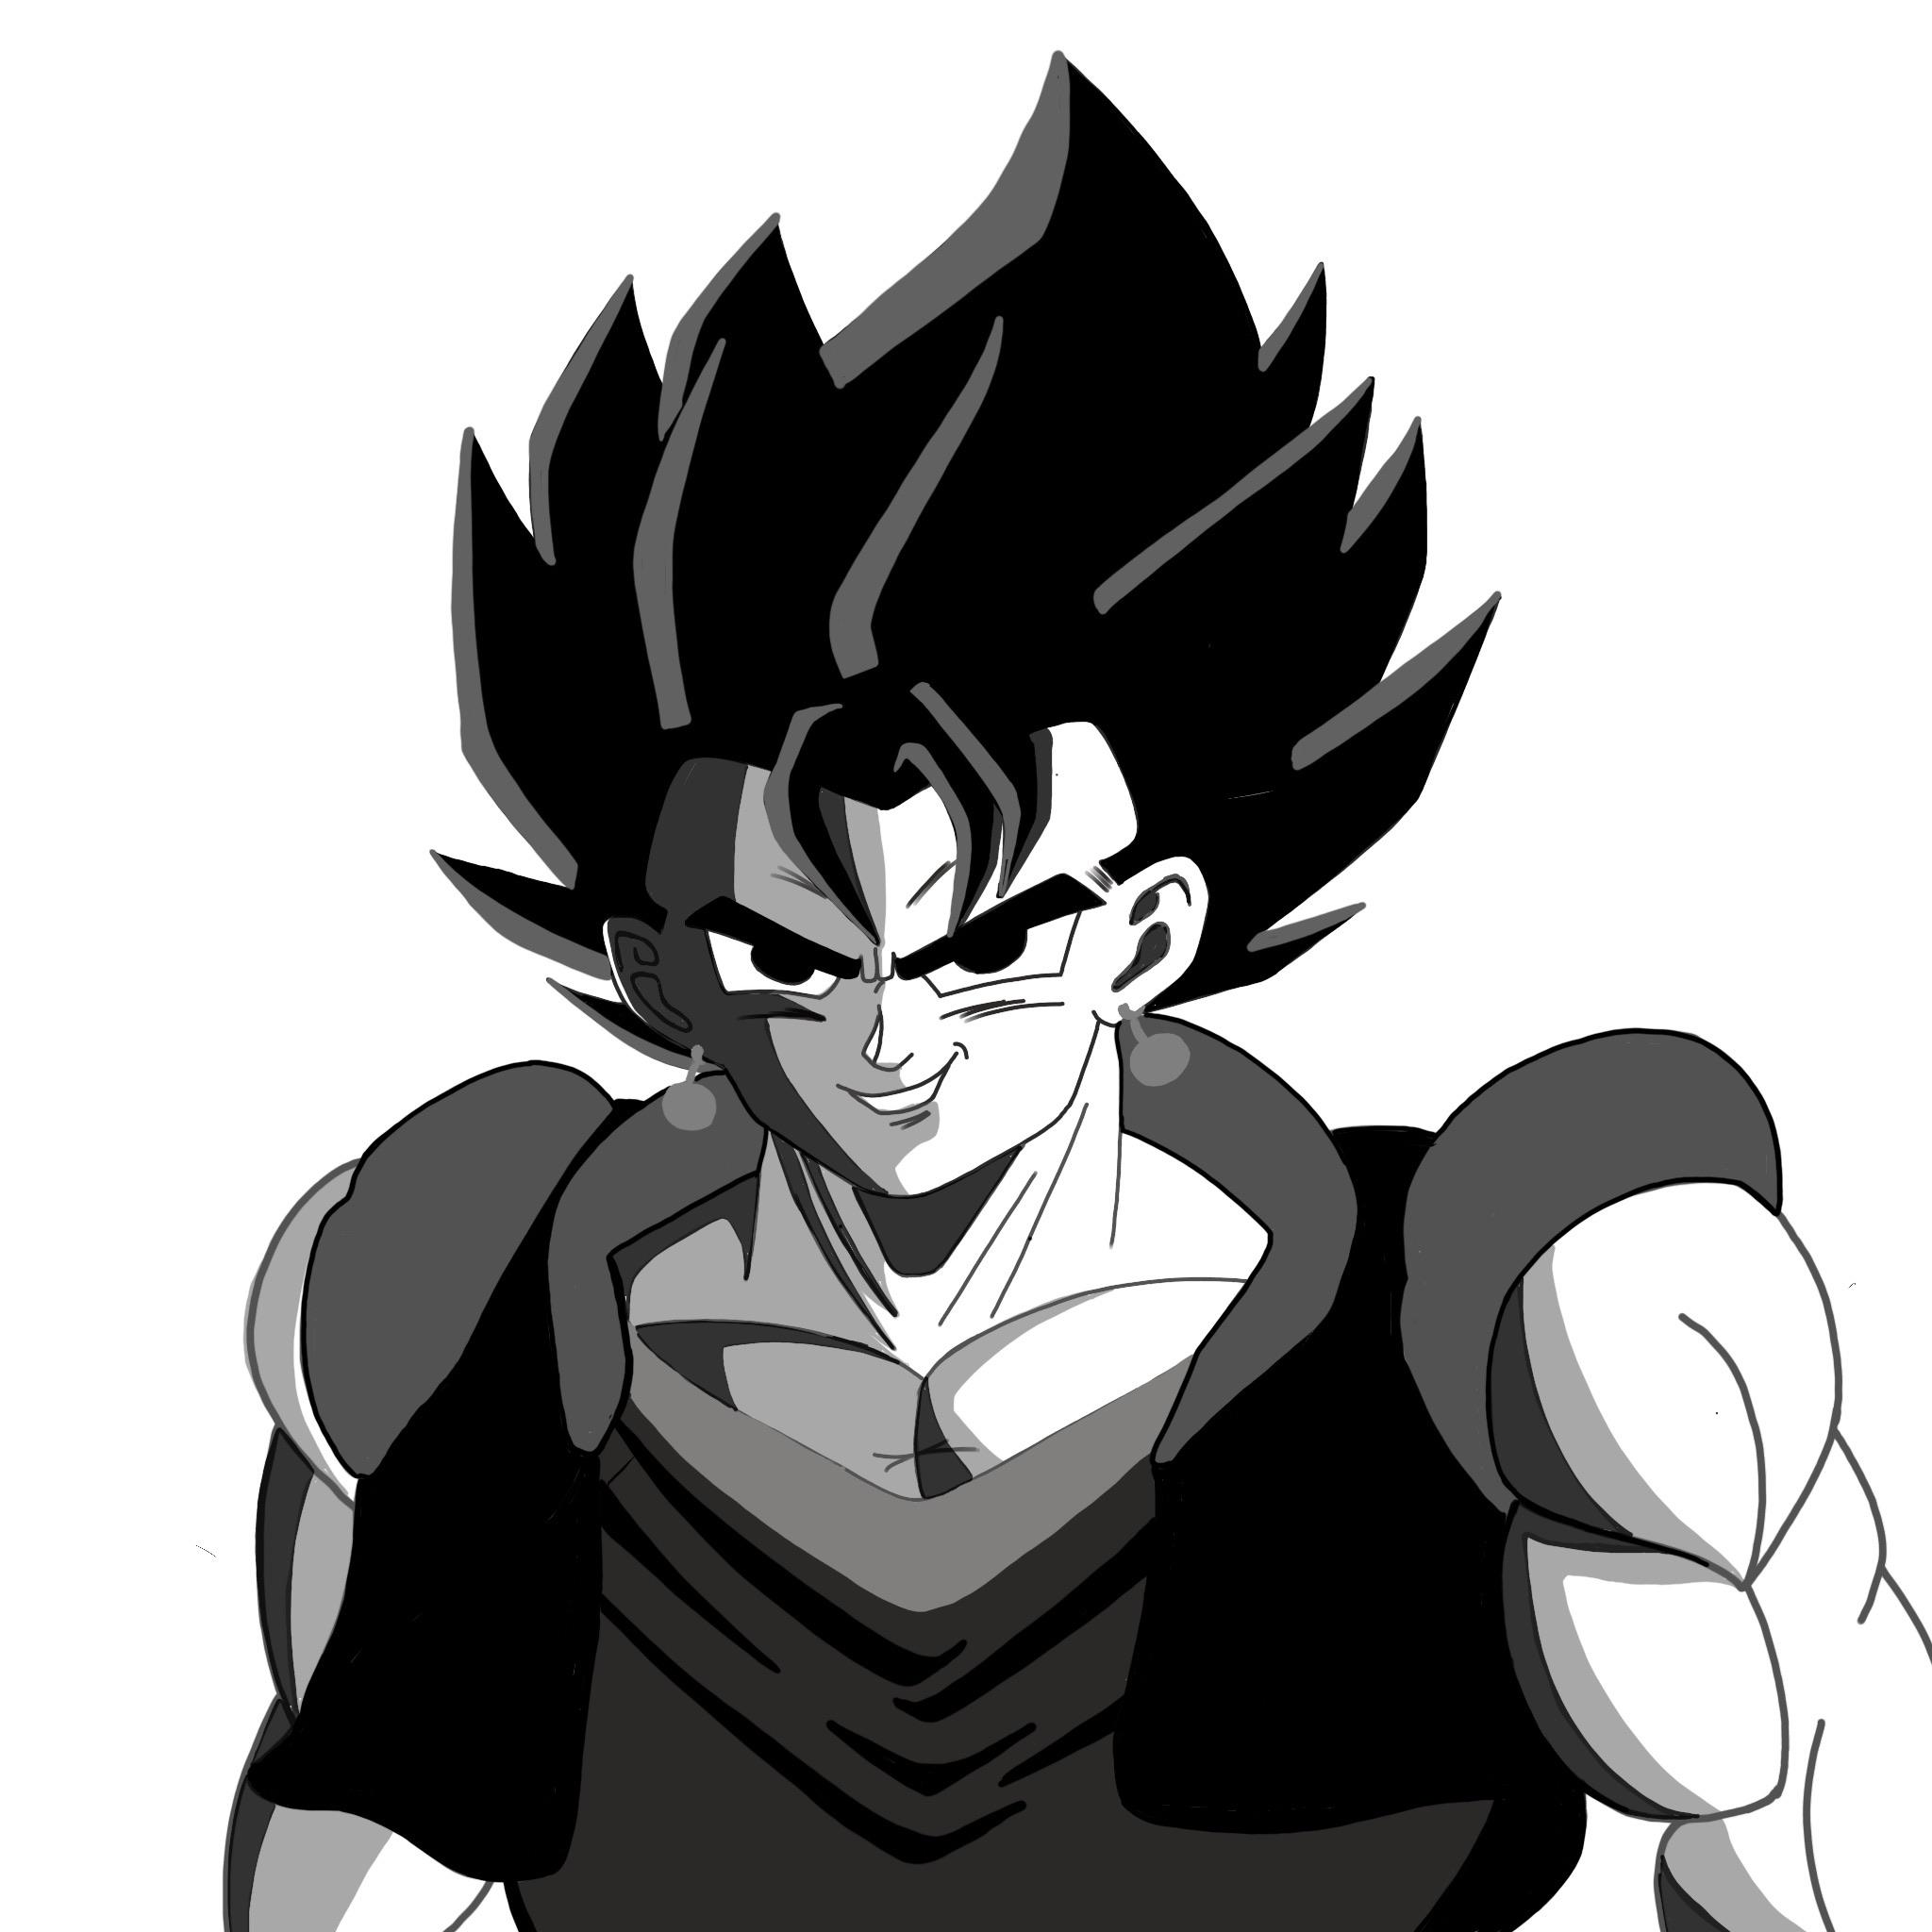 For the upcoming 5 year Anni. on Global, I tried making a fusion